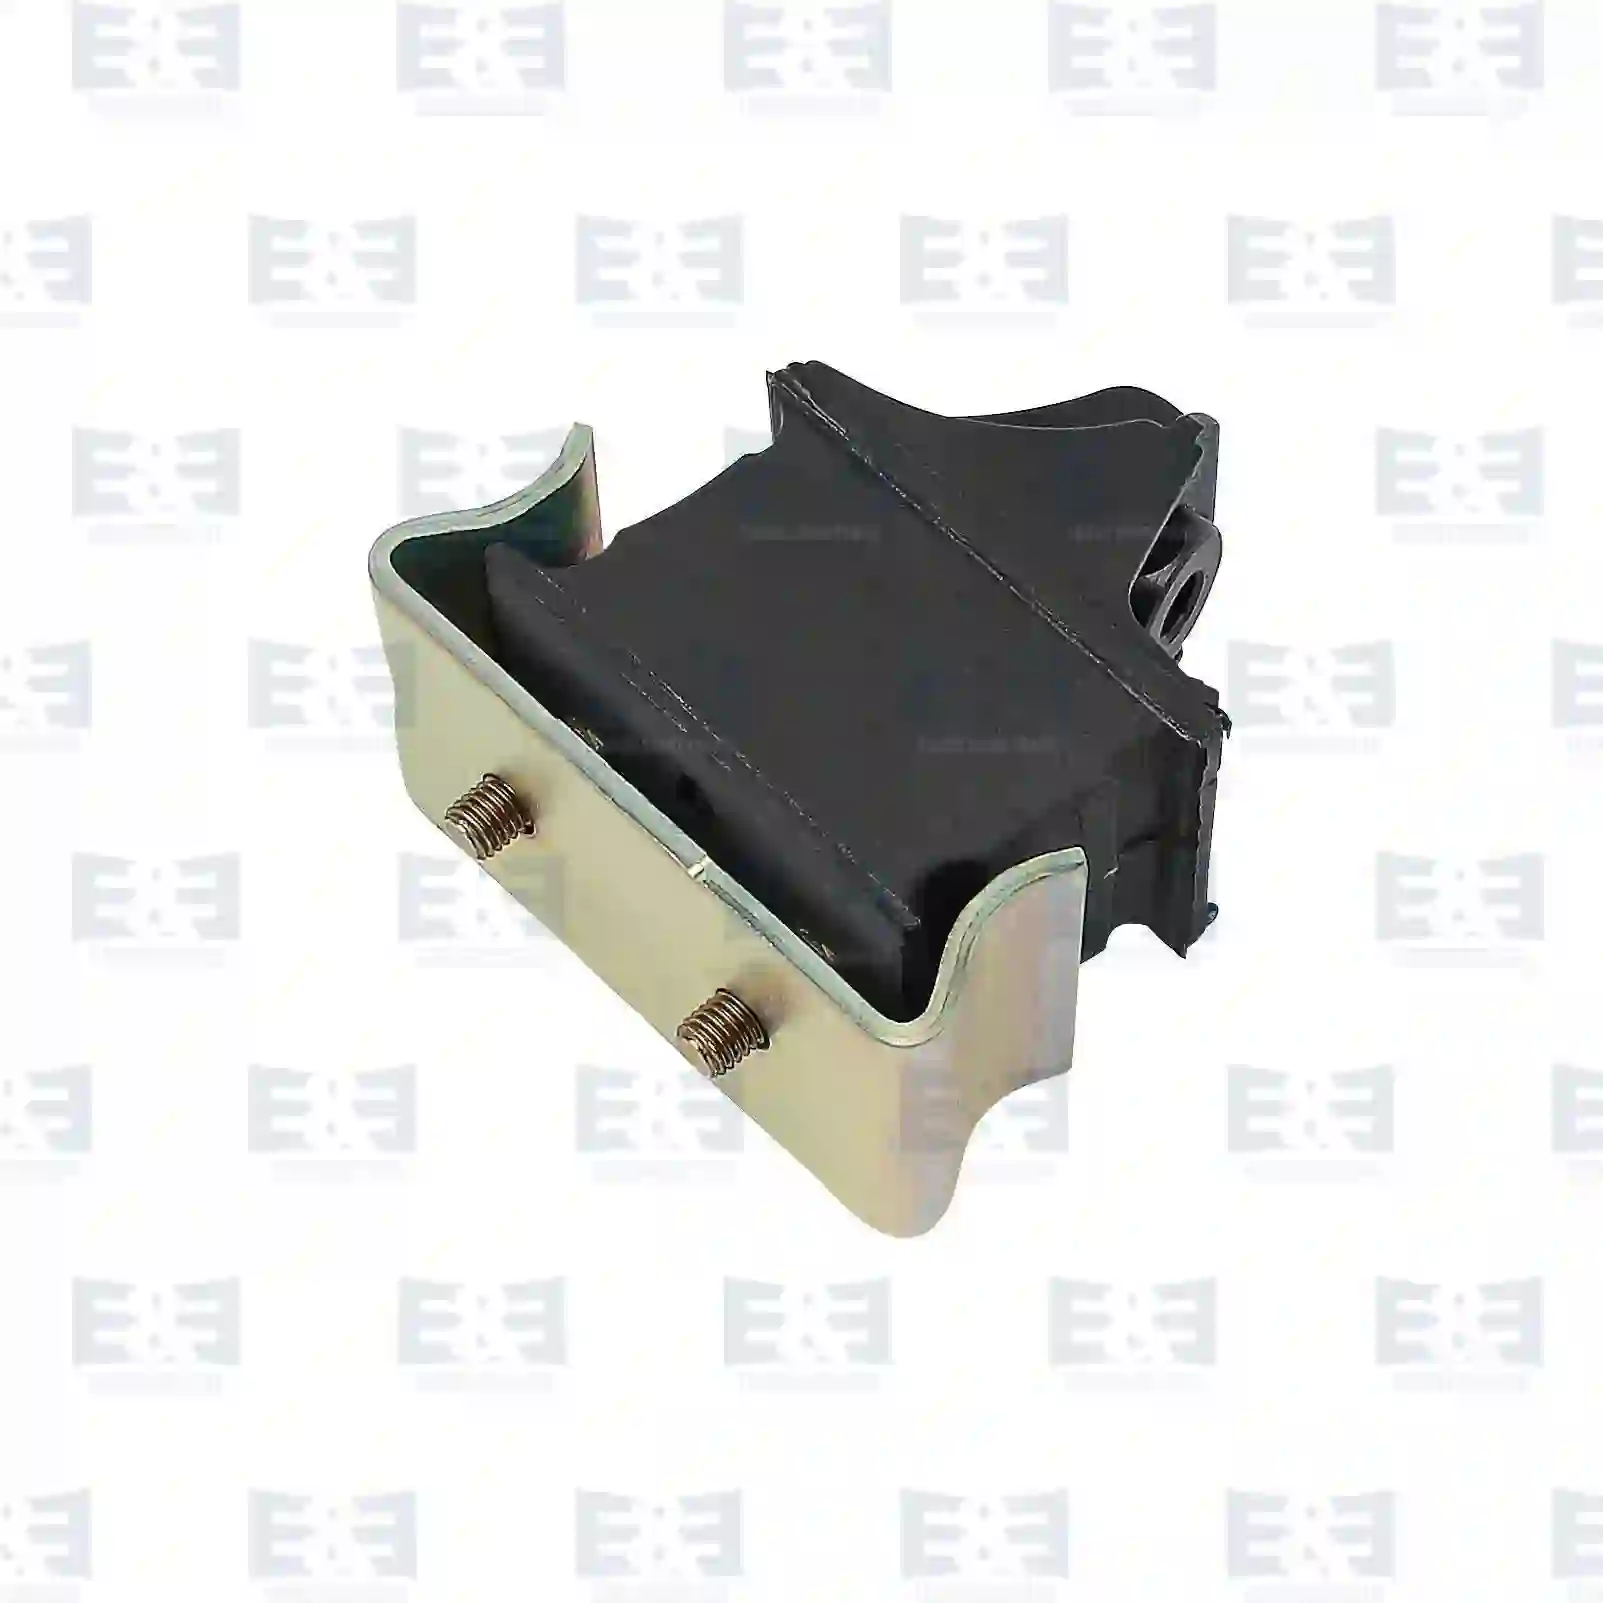  Engine mounting || E&E Truck Spare Parts | Truck Spare Parts, Auotomotive Spare Parts